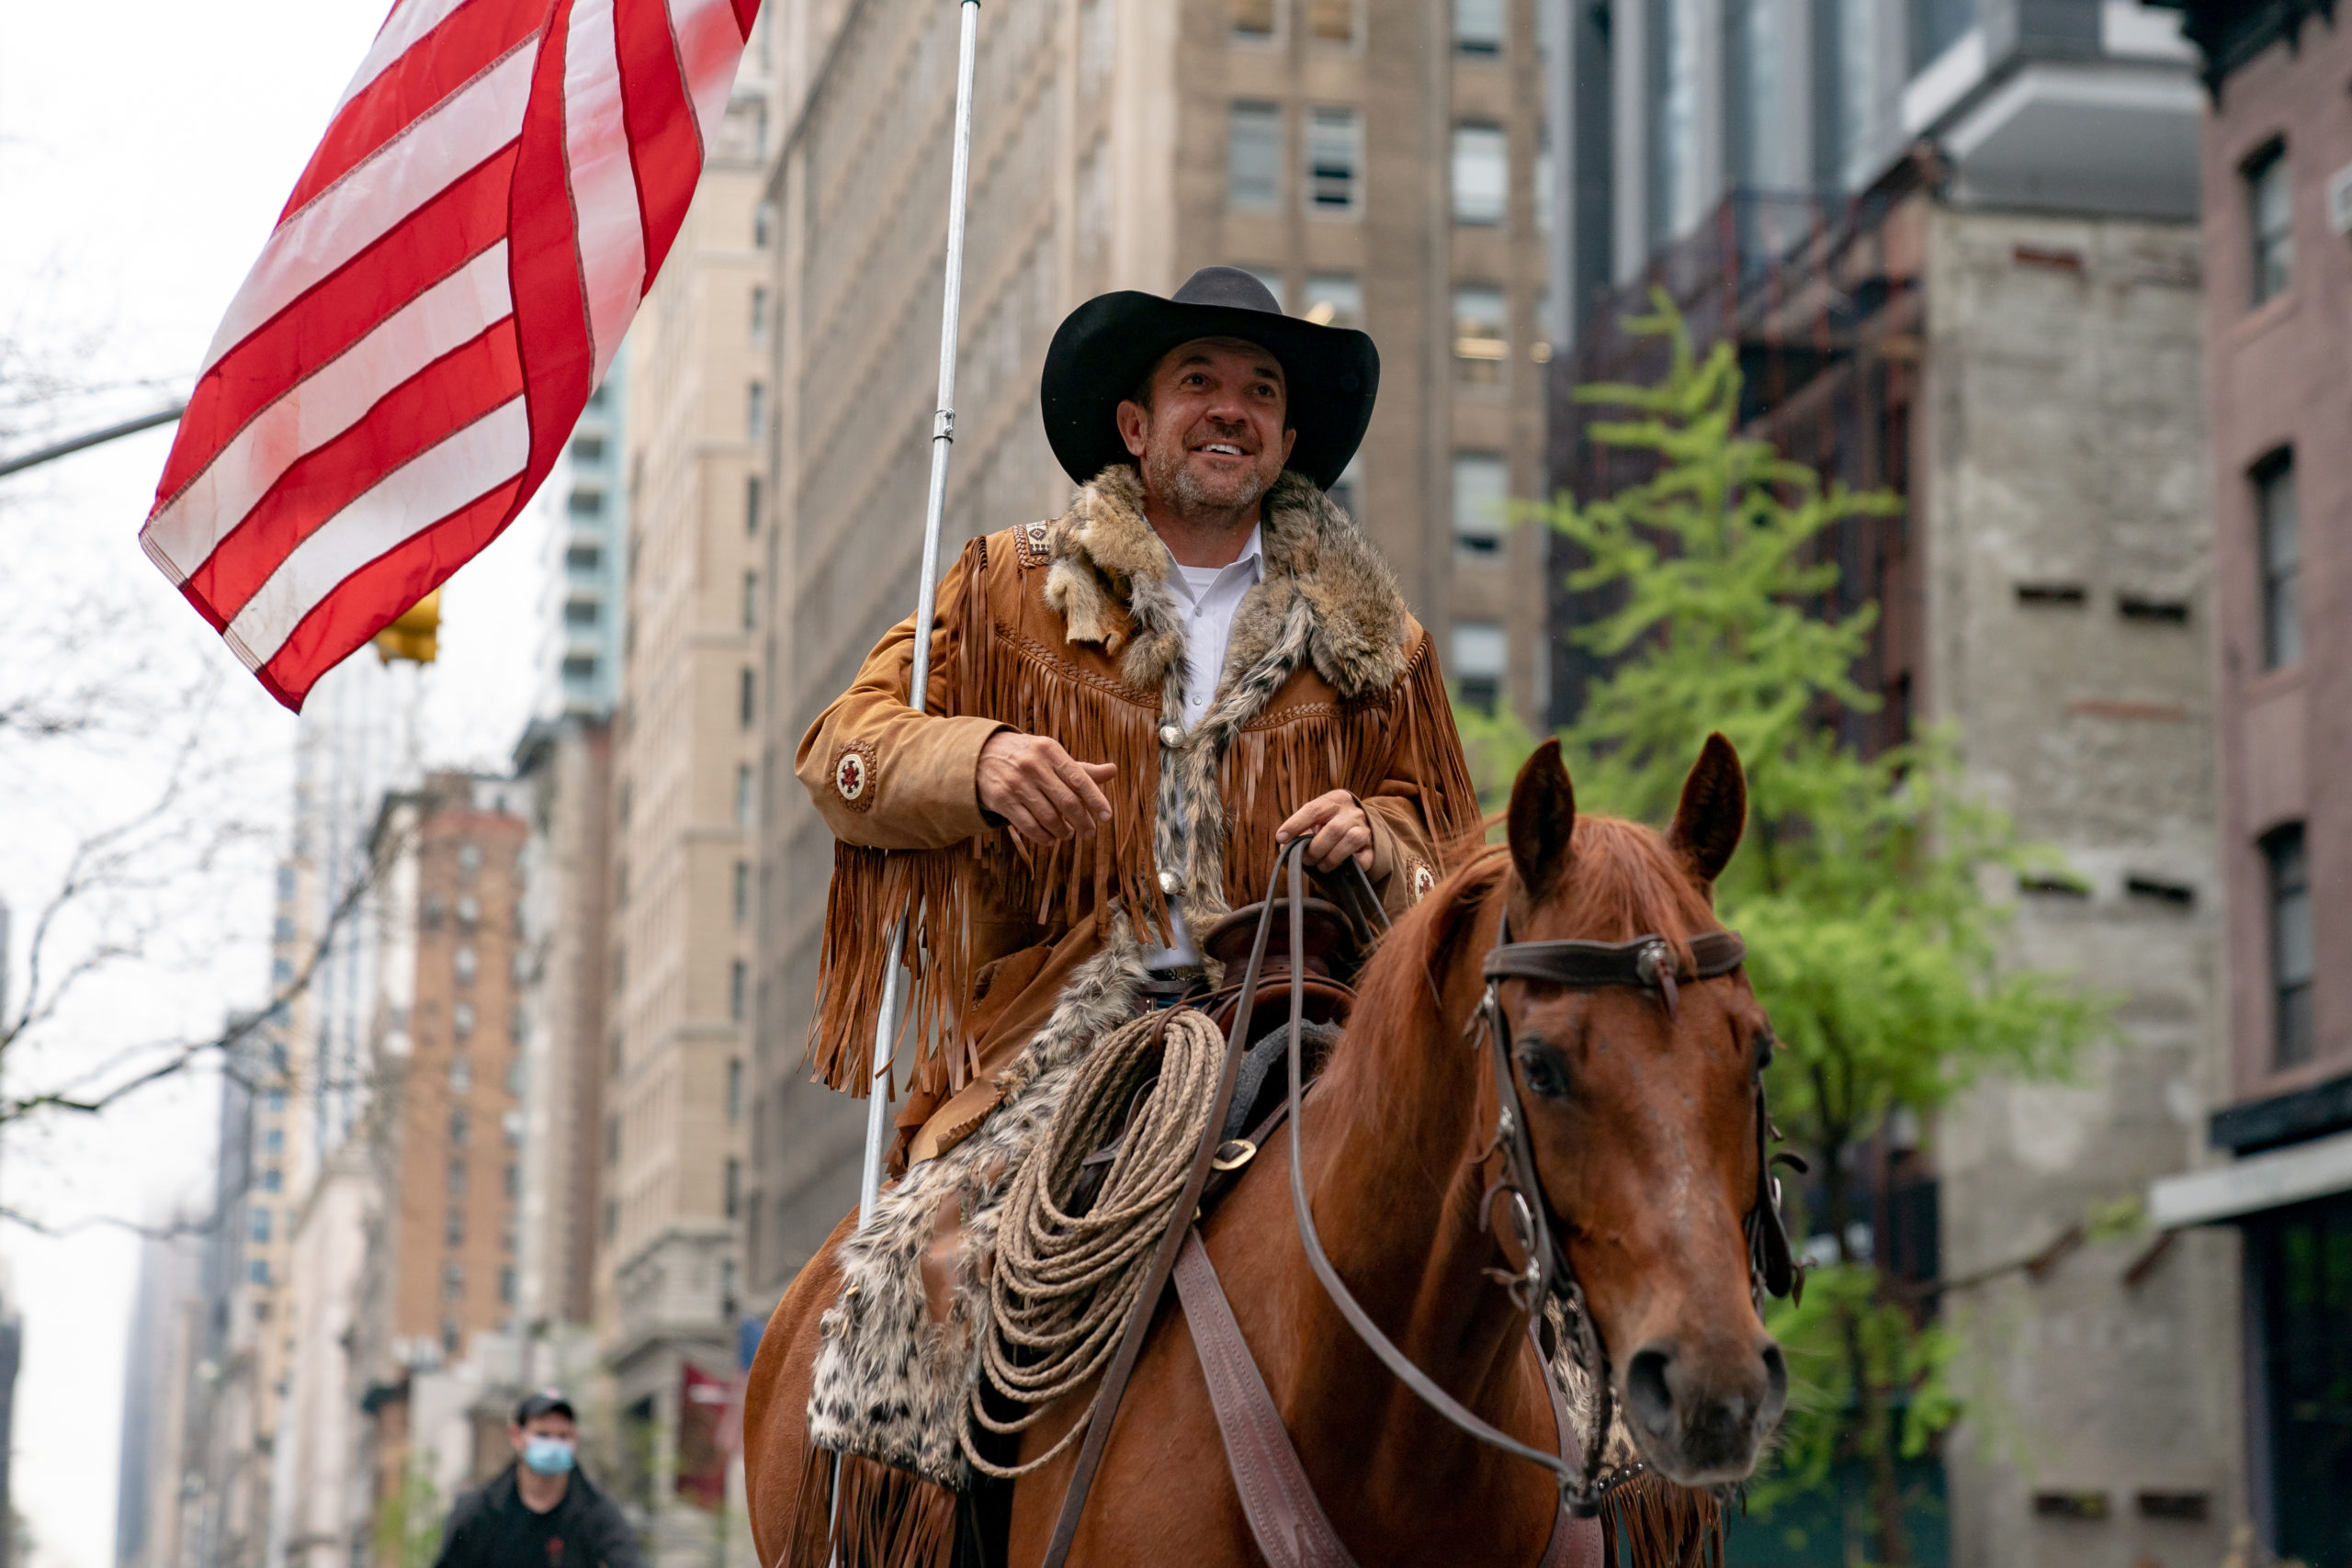 NEW YORK, NY - MAY 01: Otero County Commission Chairman and Cowboys for Trump co-founder Couy Griffin rides his horse on 5th avenue on May 1, 2020 in New York City. Mayor Bill De Blasio said that New York city has seen a decline in coronavirus hospitalizations and the rate of people testing positive for the disease, but that reopening is still a few months away.(Photo by Jeenah Moon/Getty Images)